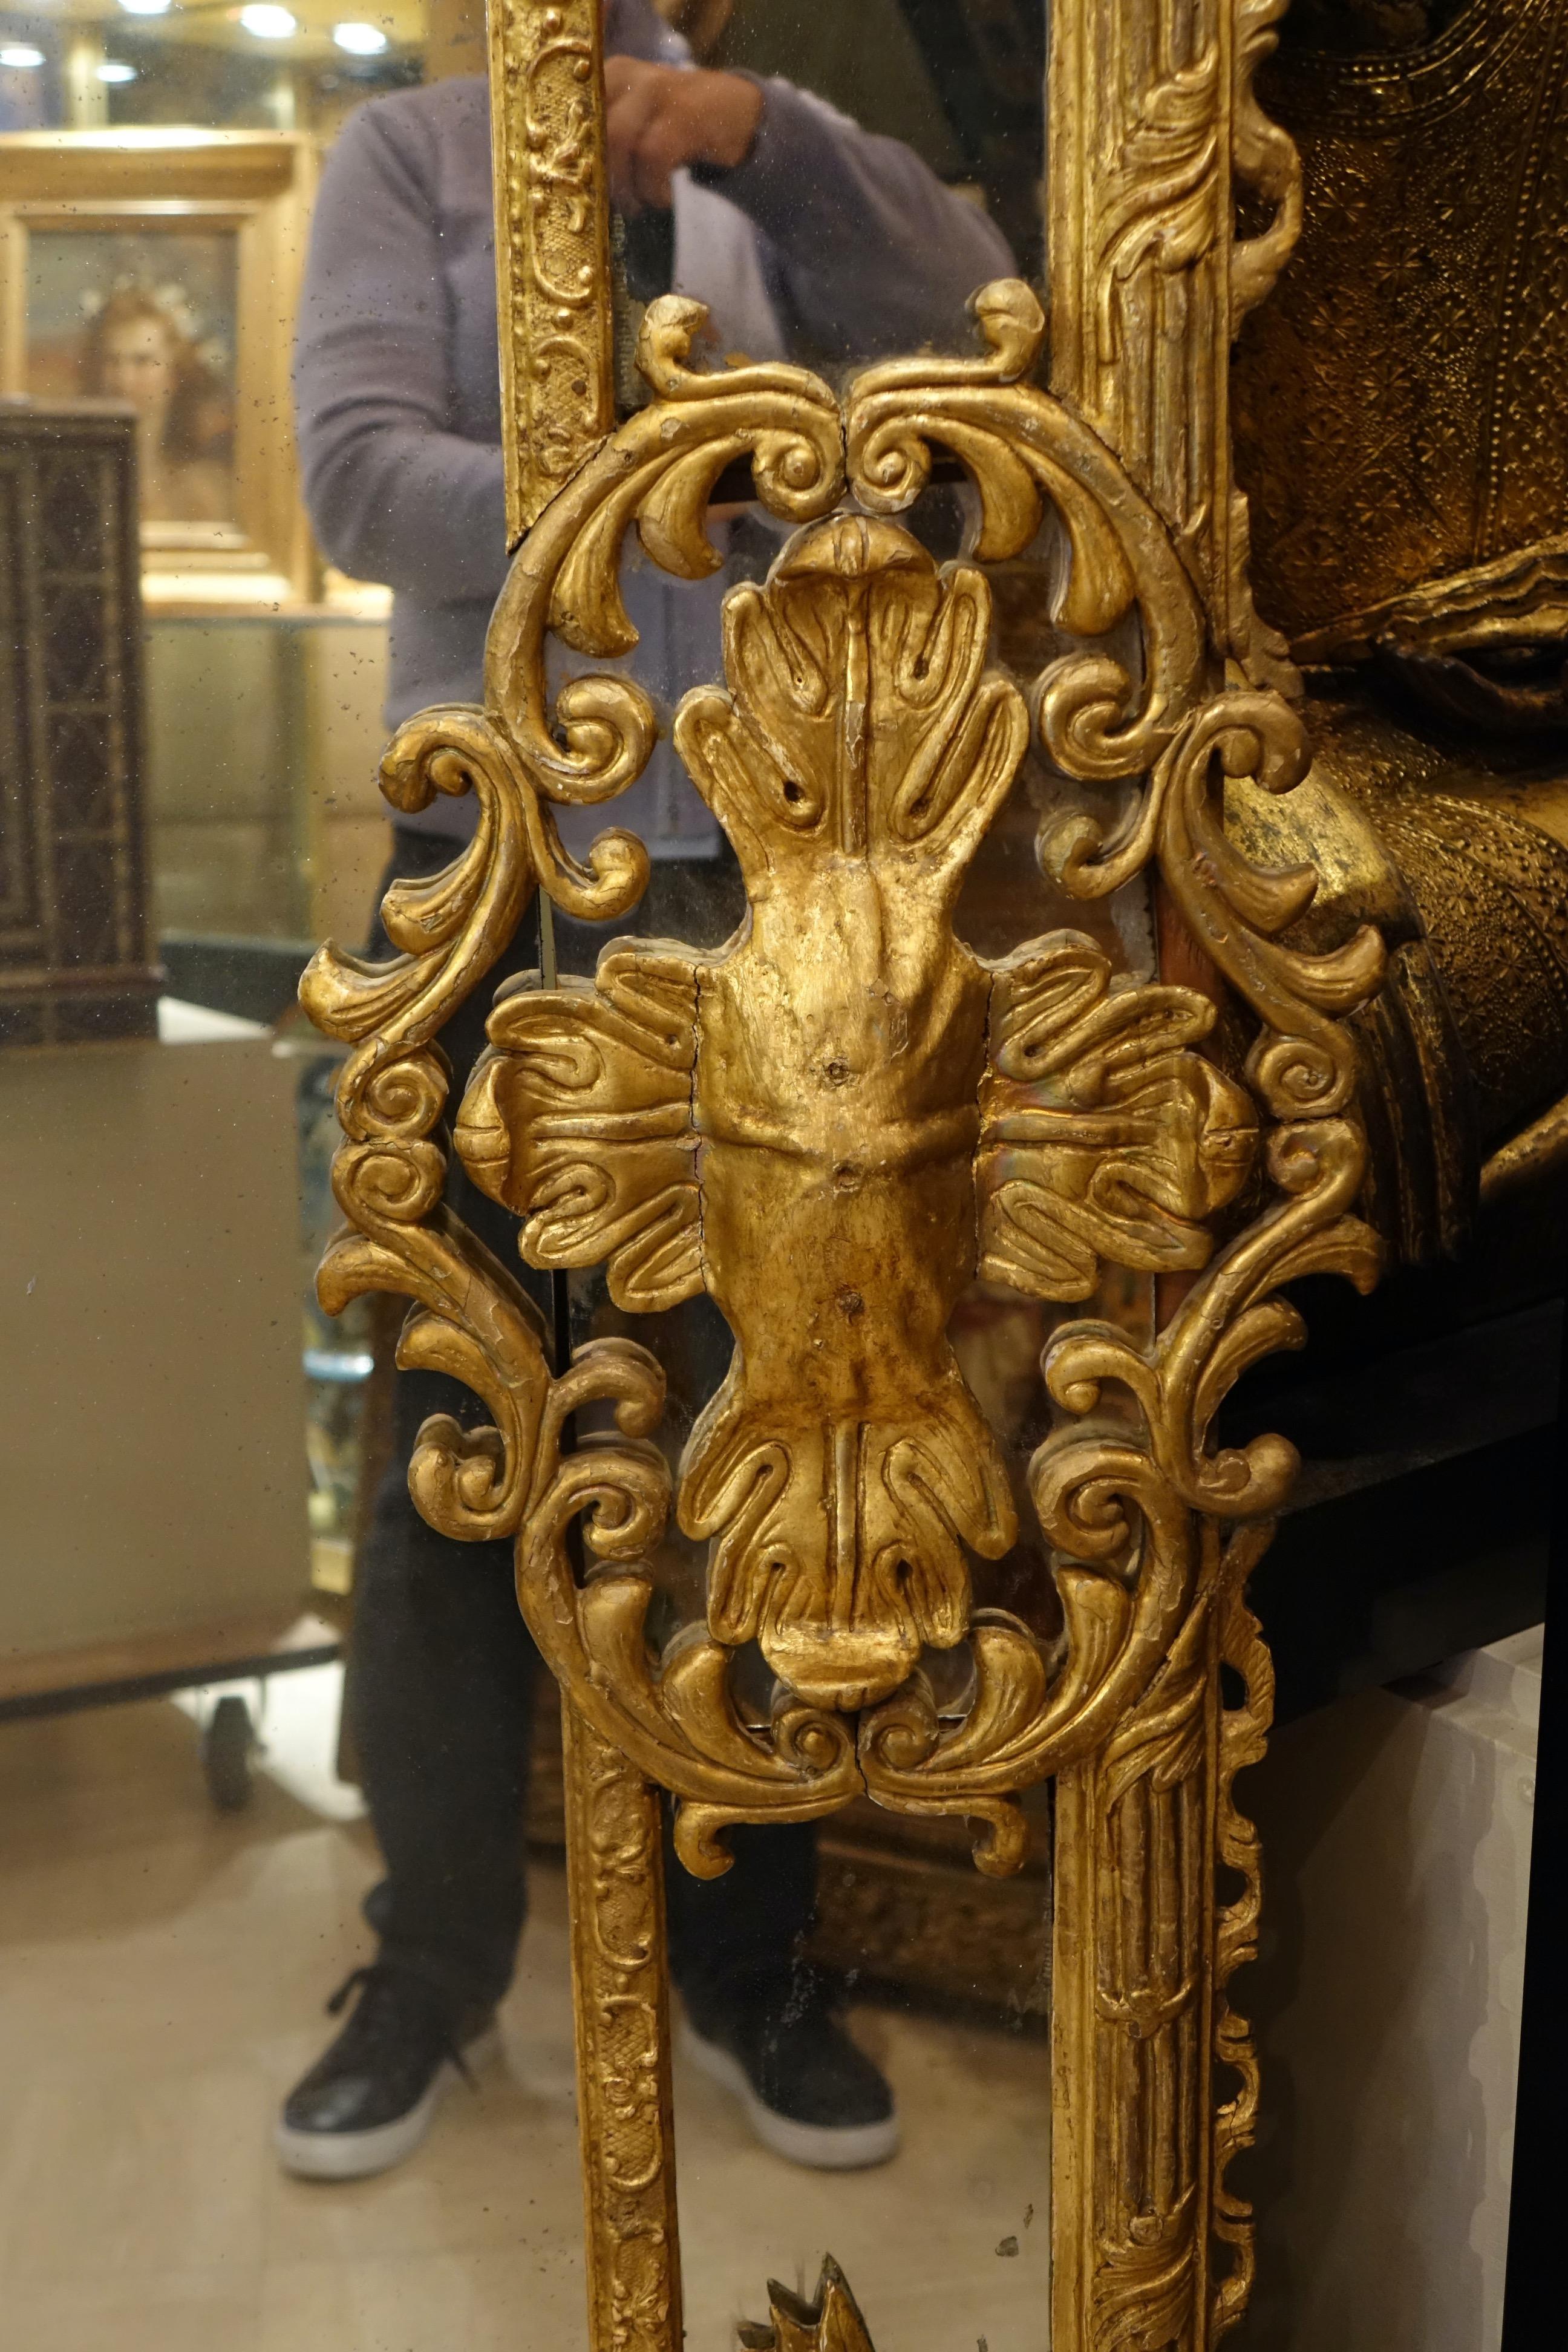 Large mirror in sculpted and gilt wood, decorated with foliage scrolls, acanthus leaves, fluted columns and two large cross-shaped designs on each side. The whole set on claw feet. Mercury glass and pare-closes. Parquetry at the rear.
Some wear and